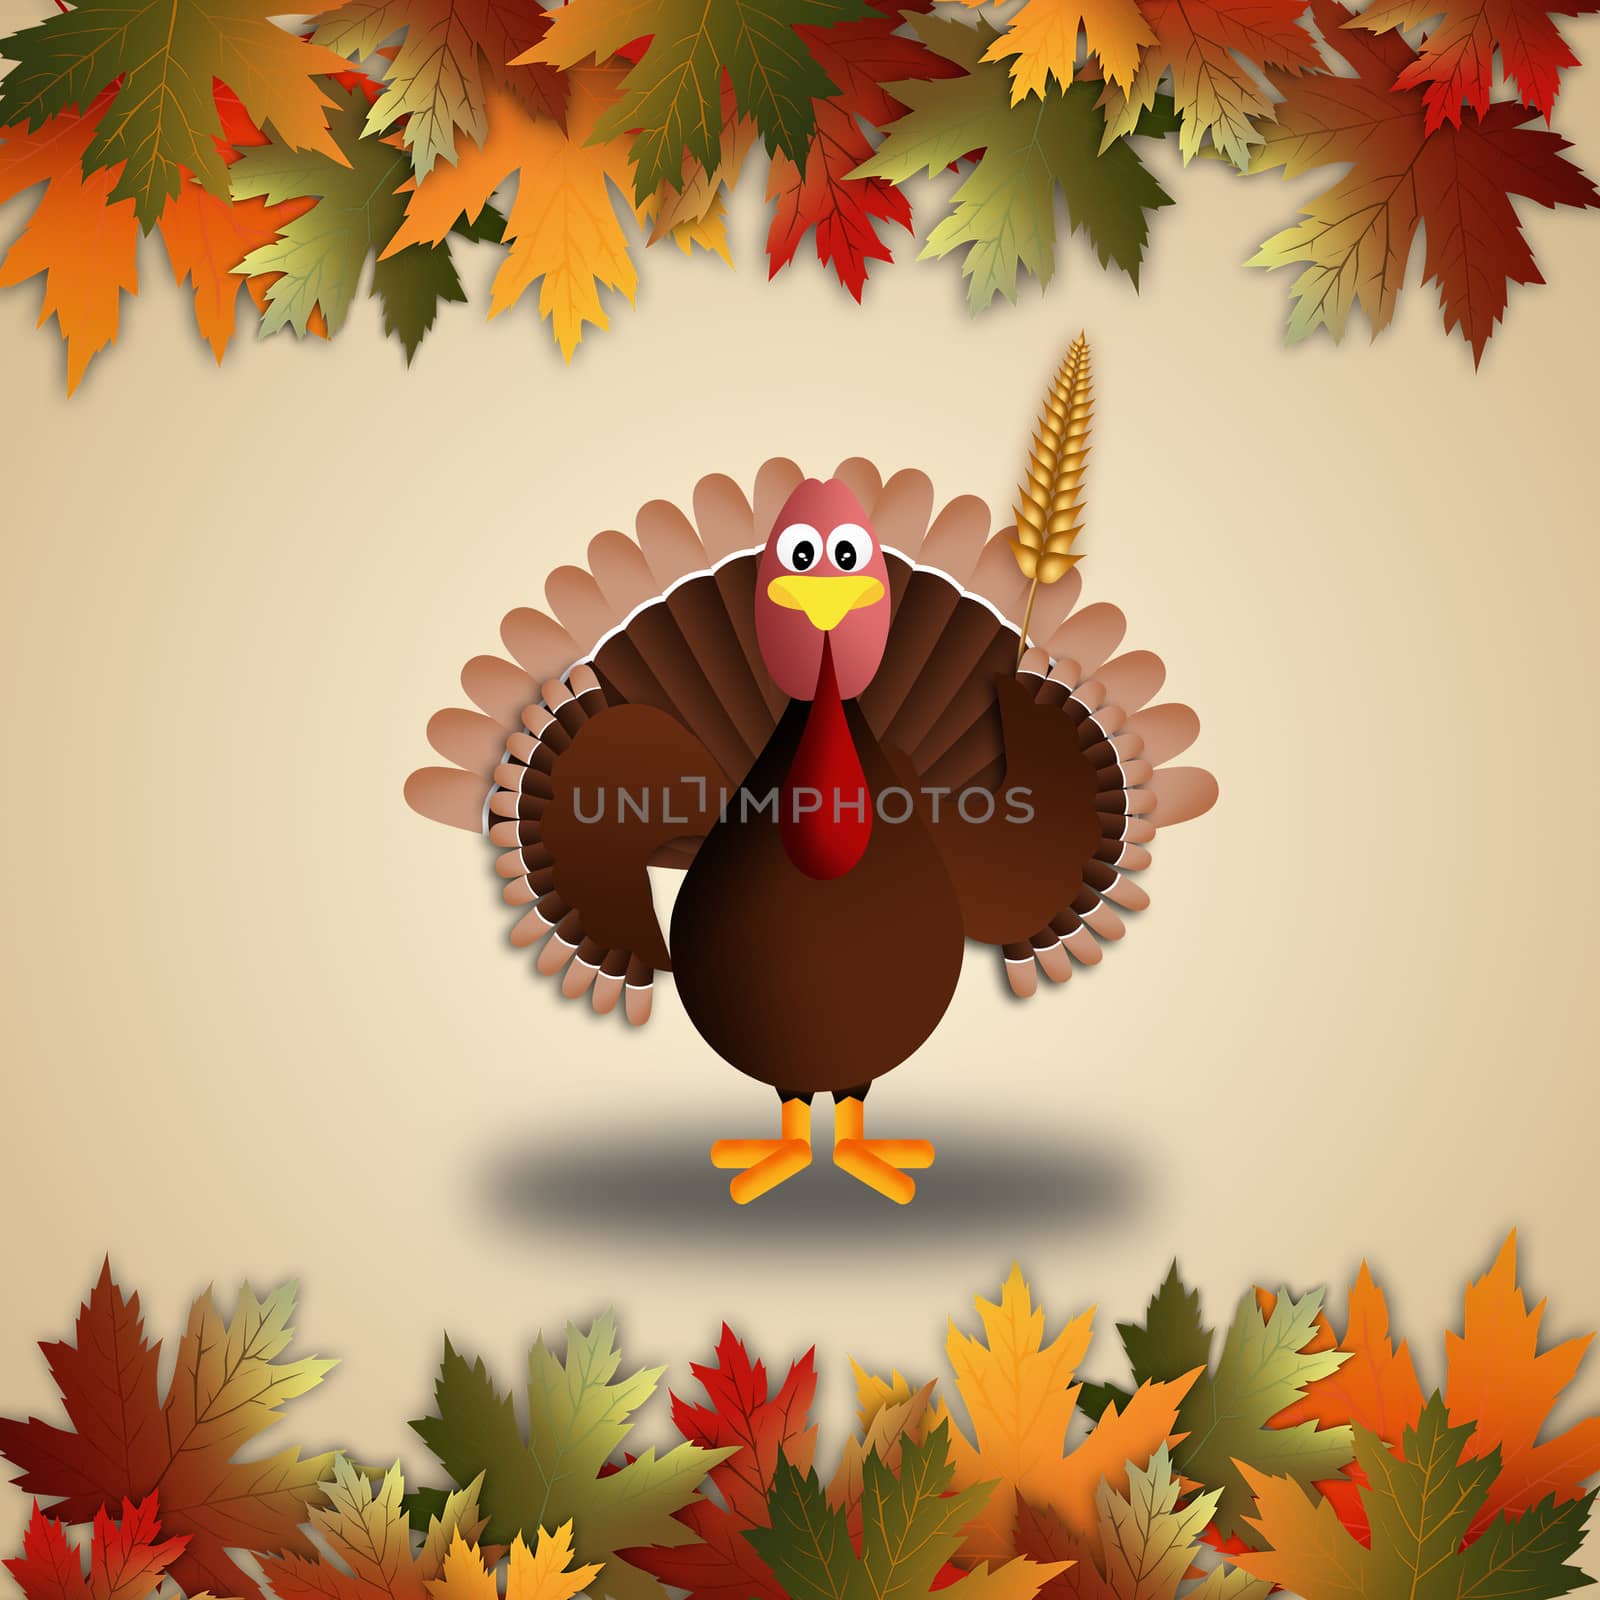 illustration of a turkey for Thanksgiving